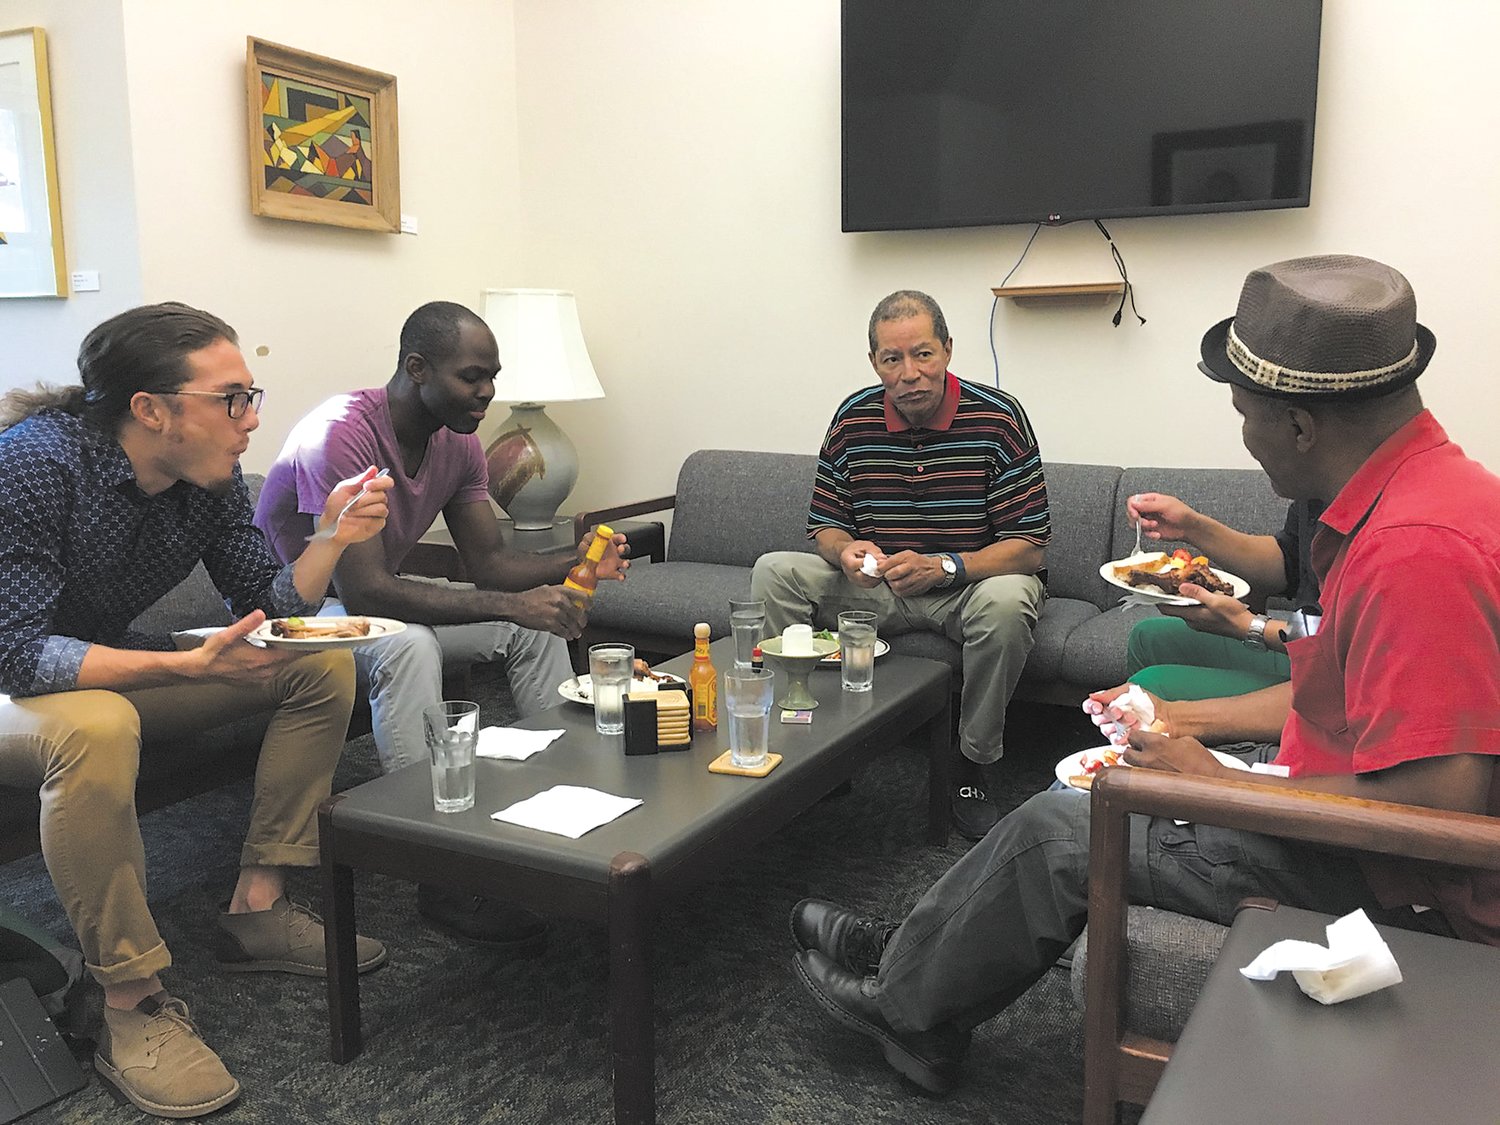 People find common ground when they come together over a meal and conversation, according to Russel Balenger, who leads The Circle of Peace gatherings in order to promote racial healing and stop violence. (Photo submitted)